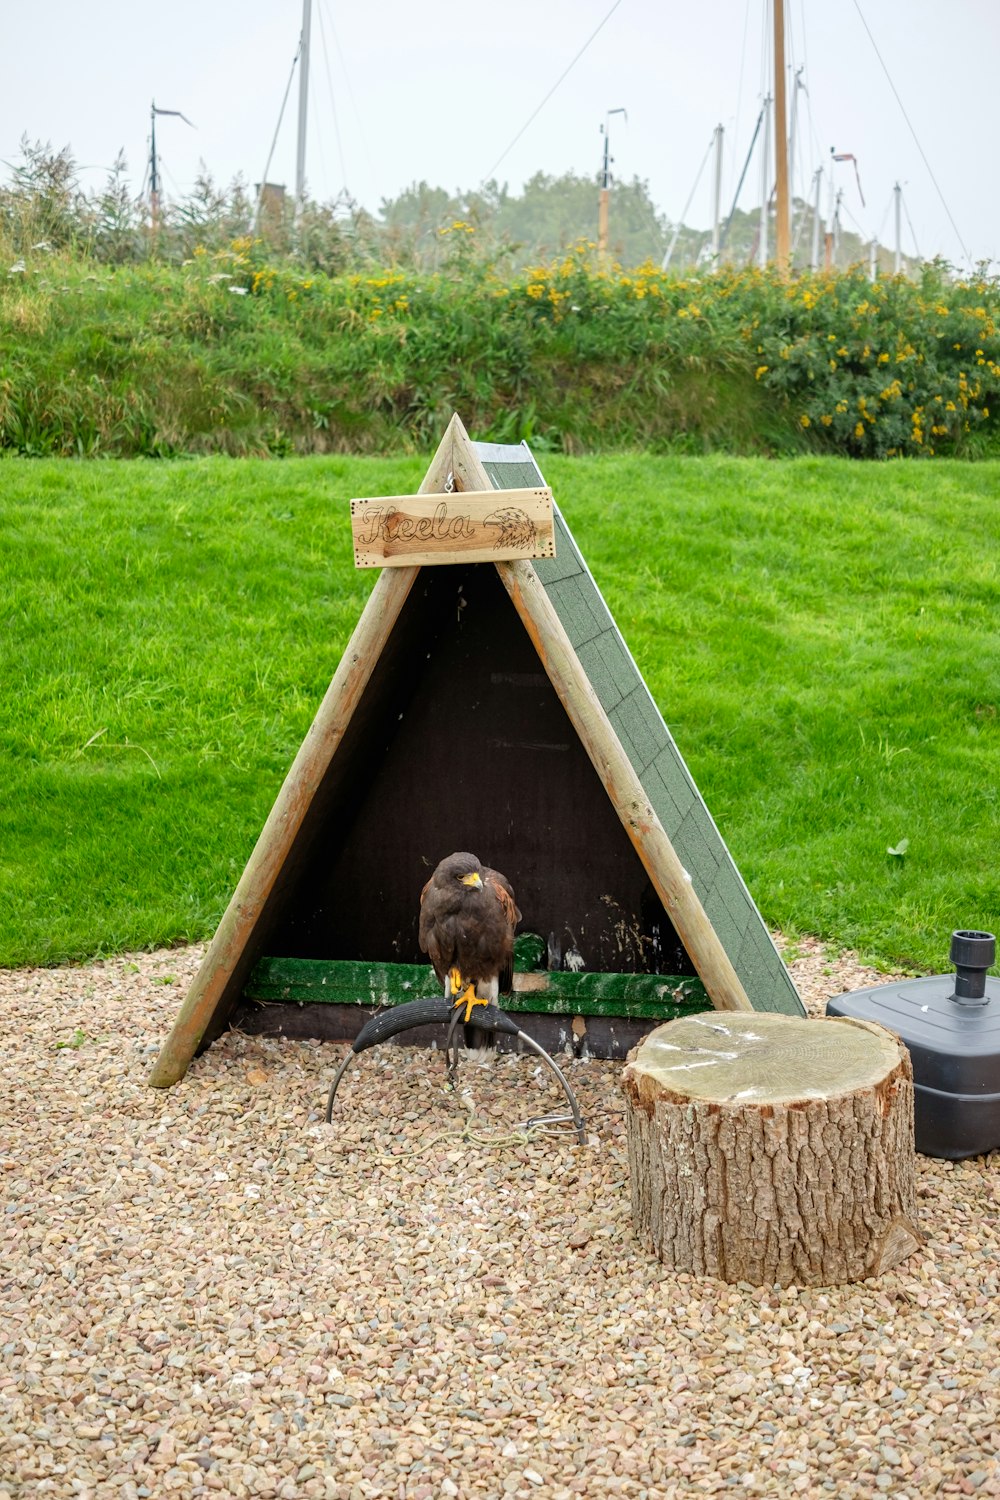 a bird is sitting in a wooden shelter